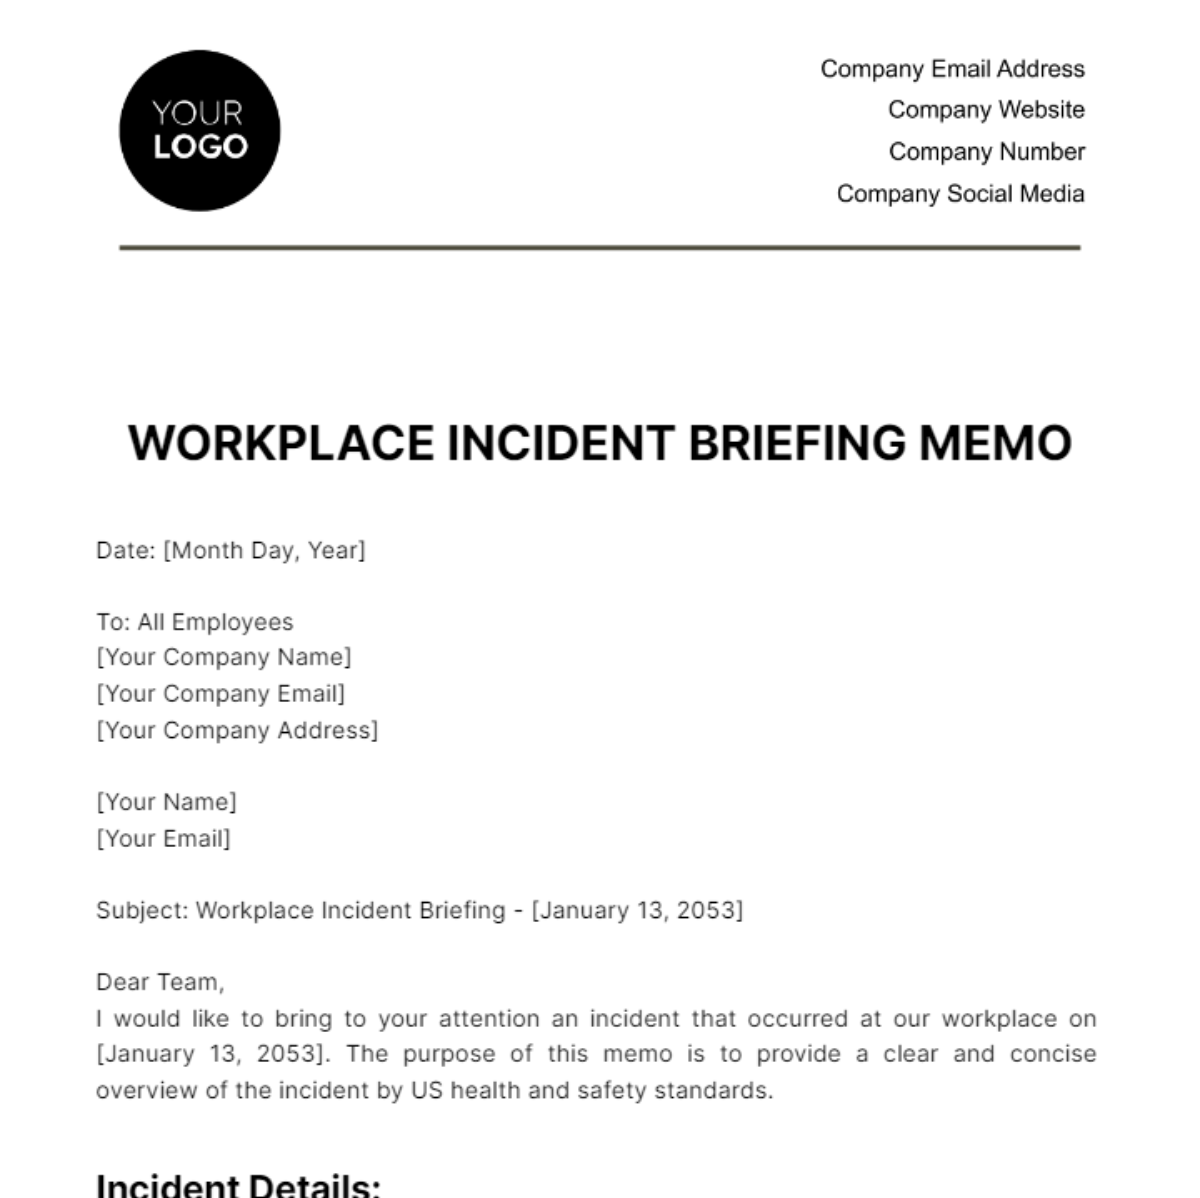 Free Workplace Incident Briefing Memo Template